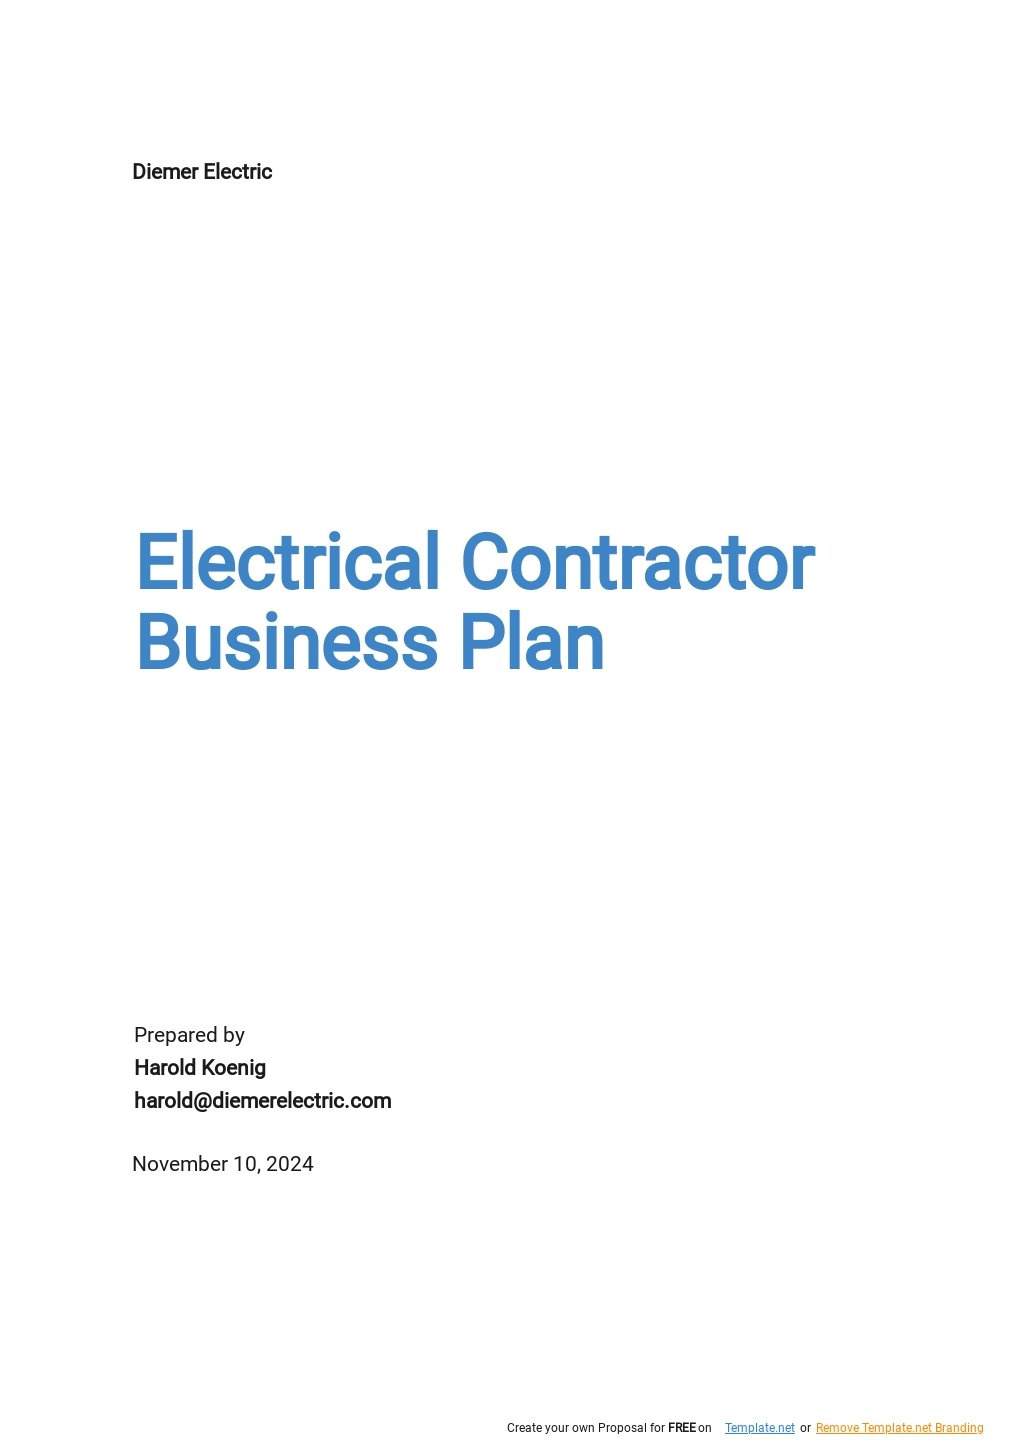 business plan on electrical